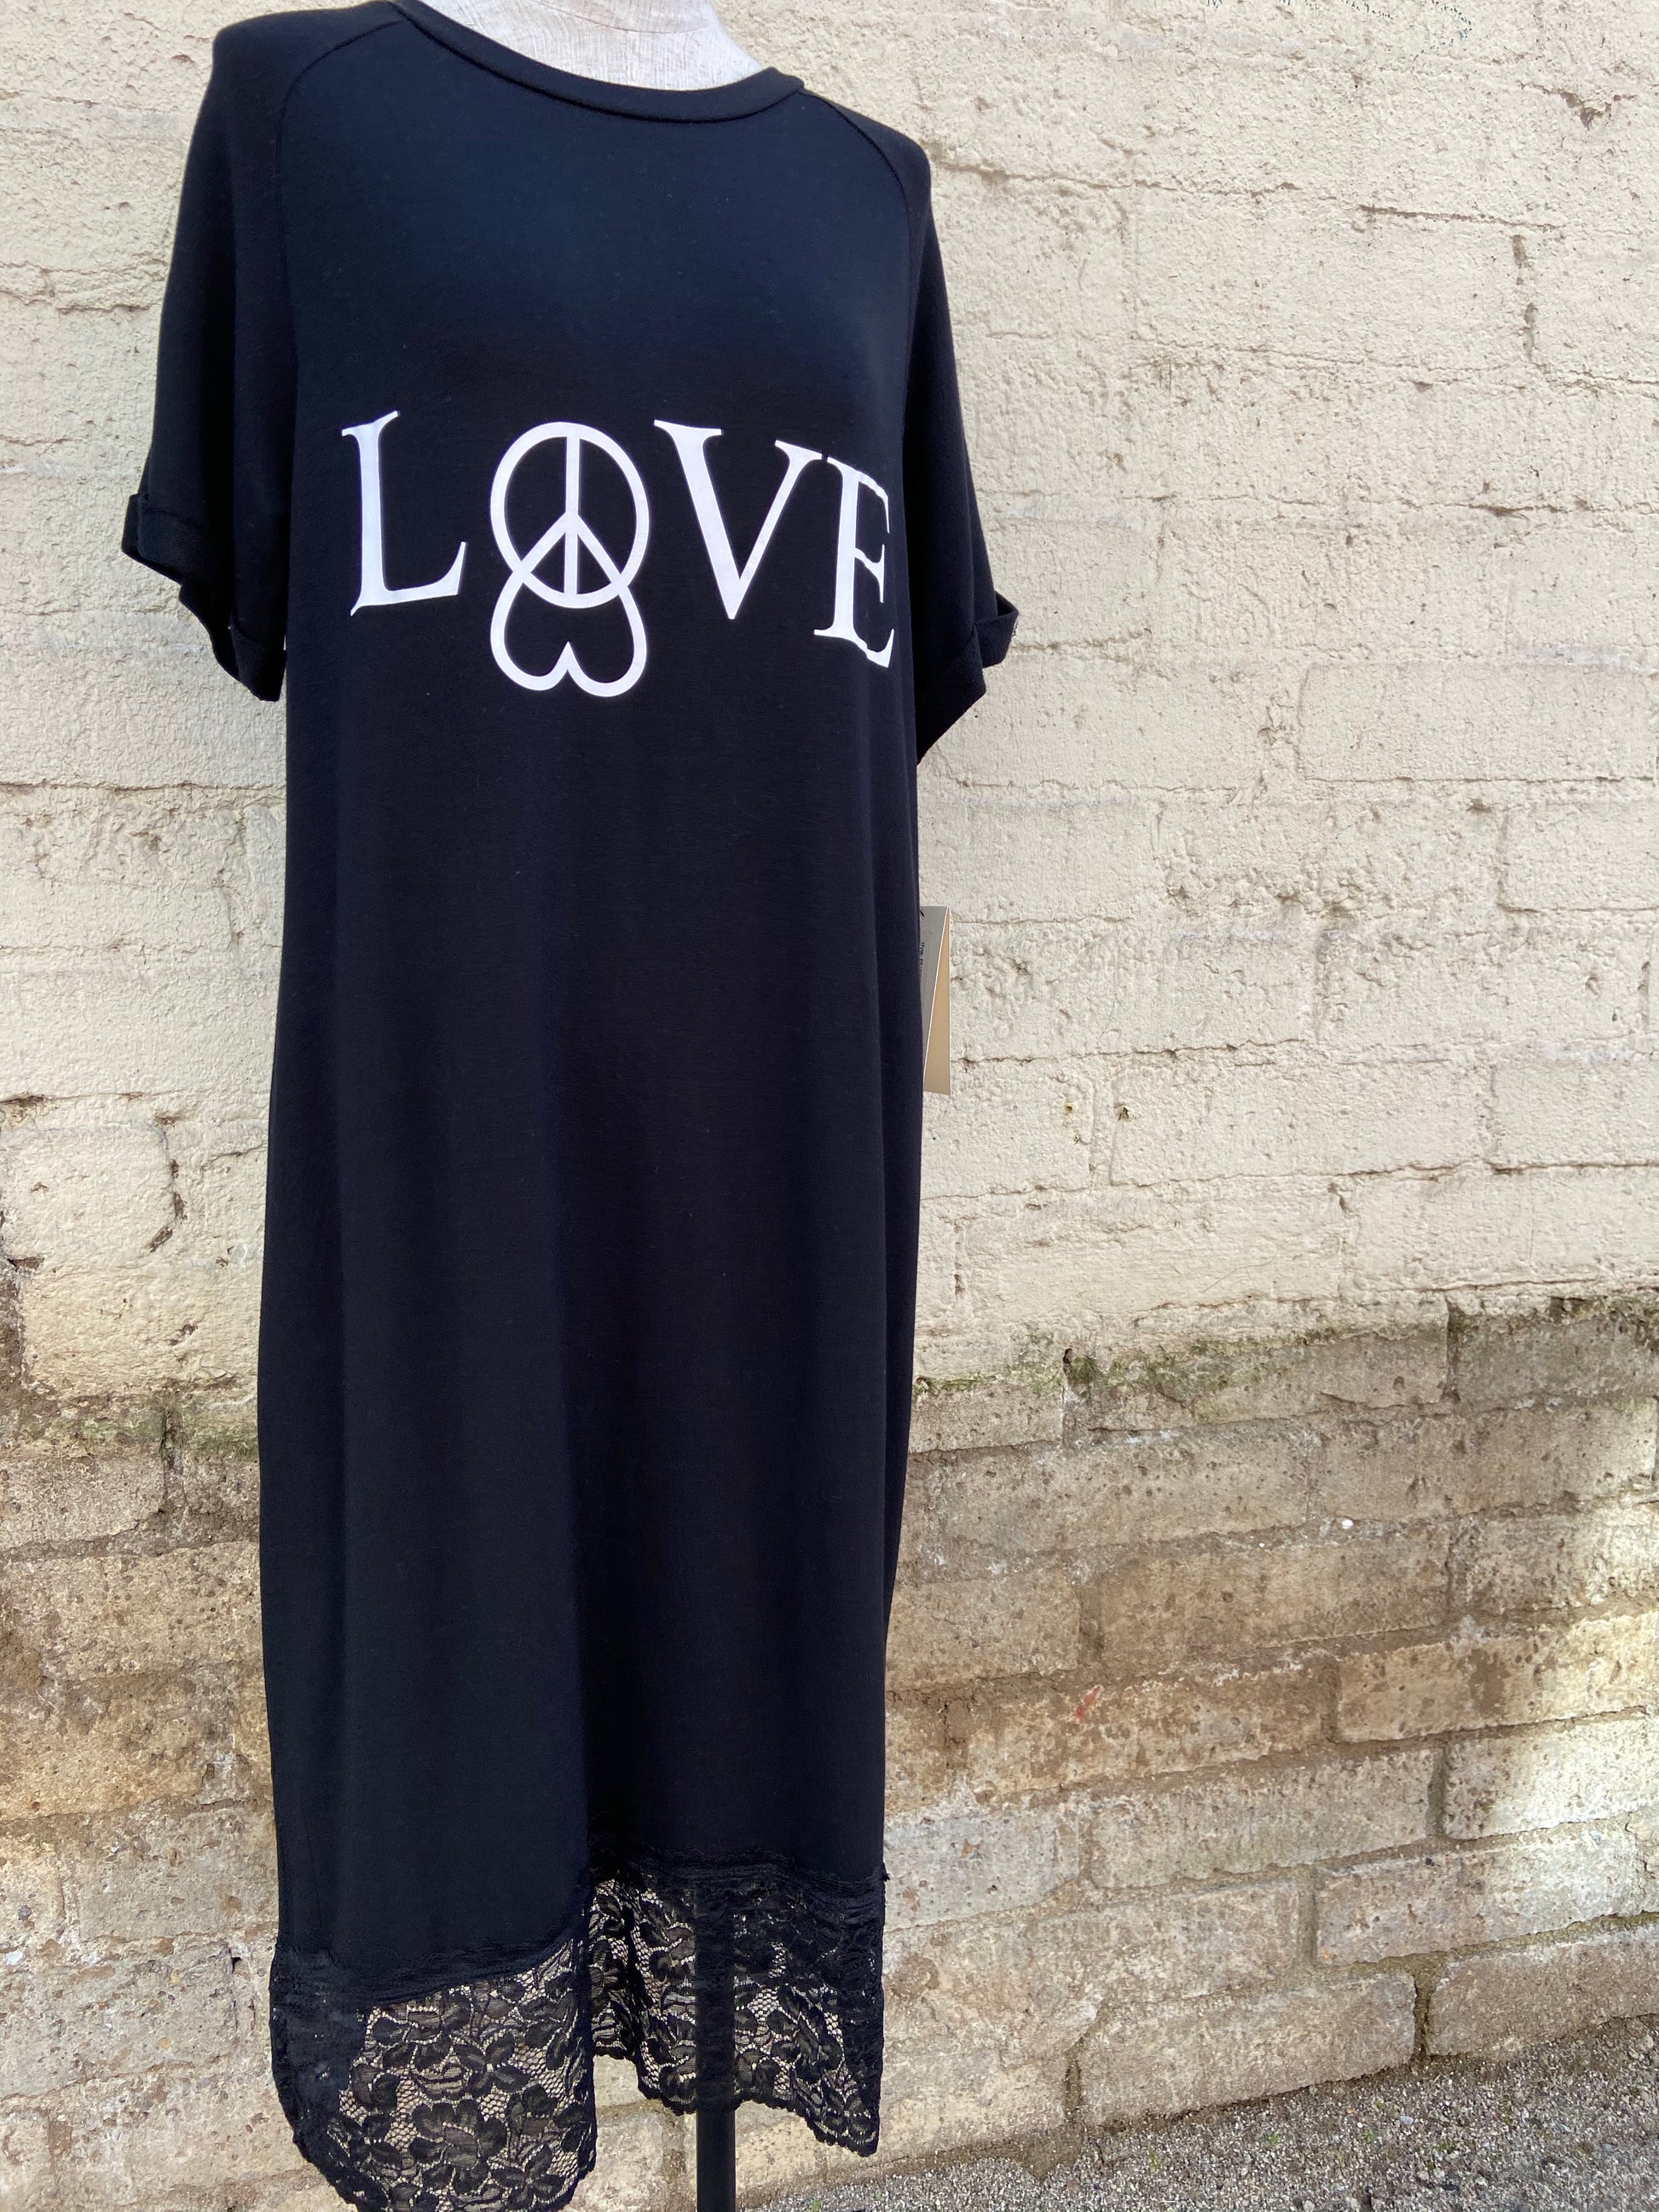 Extremely comfortable, black, short sleeved nightgown. It has a lovely lace trim at the bottom, and a graphic that reads "Love" with a heart and peace sign.